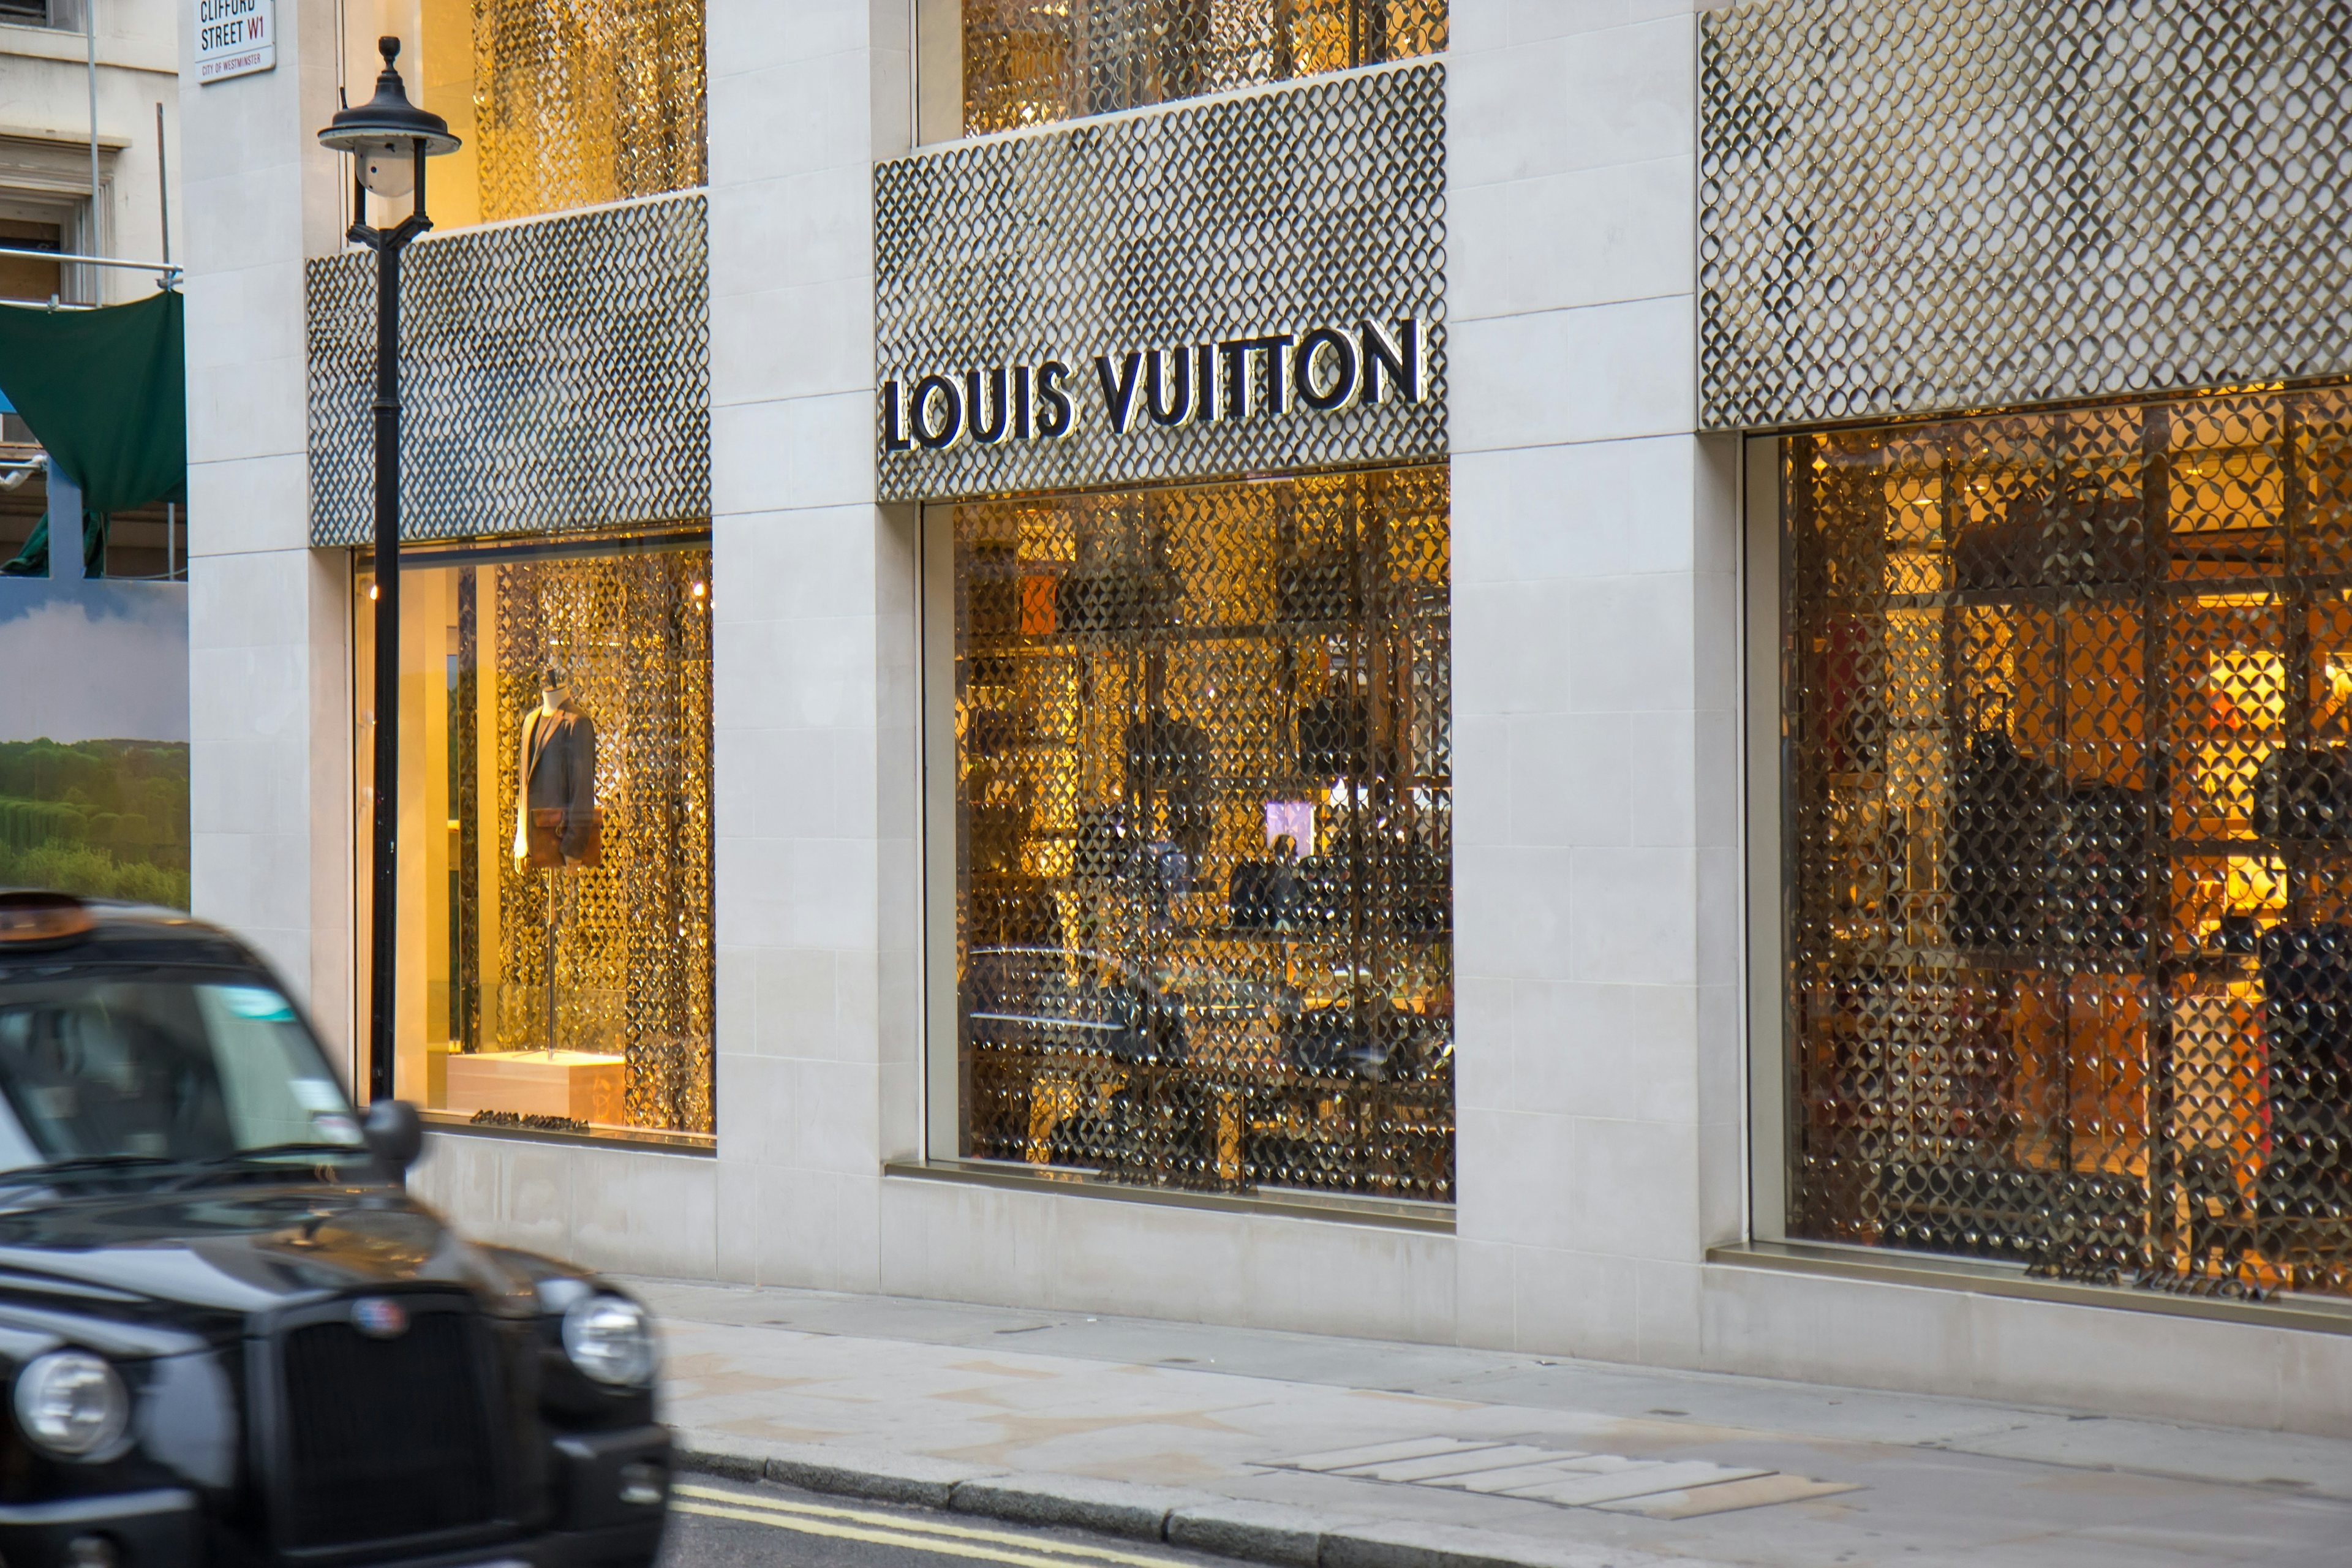 A Louis Vuitton store in London. The UK now has the cheapest luxury prices in the world, according to Deloitte. (Vladislav Gajic/Shutterstock.com)